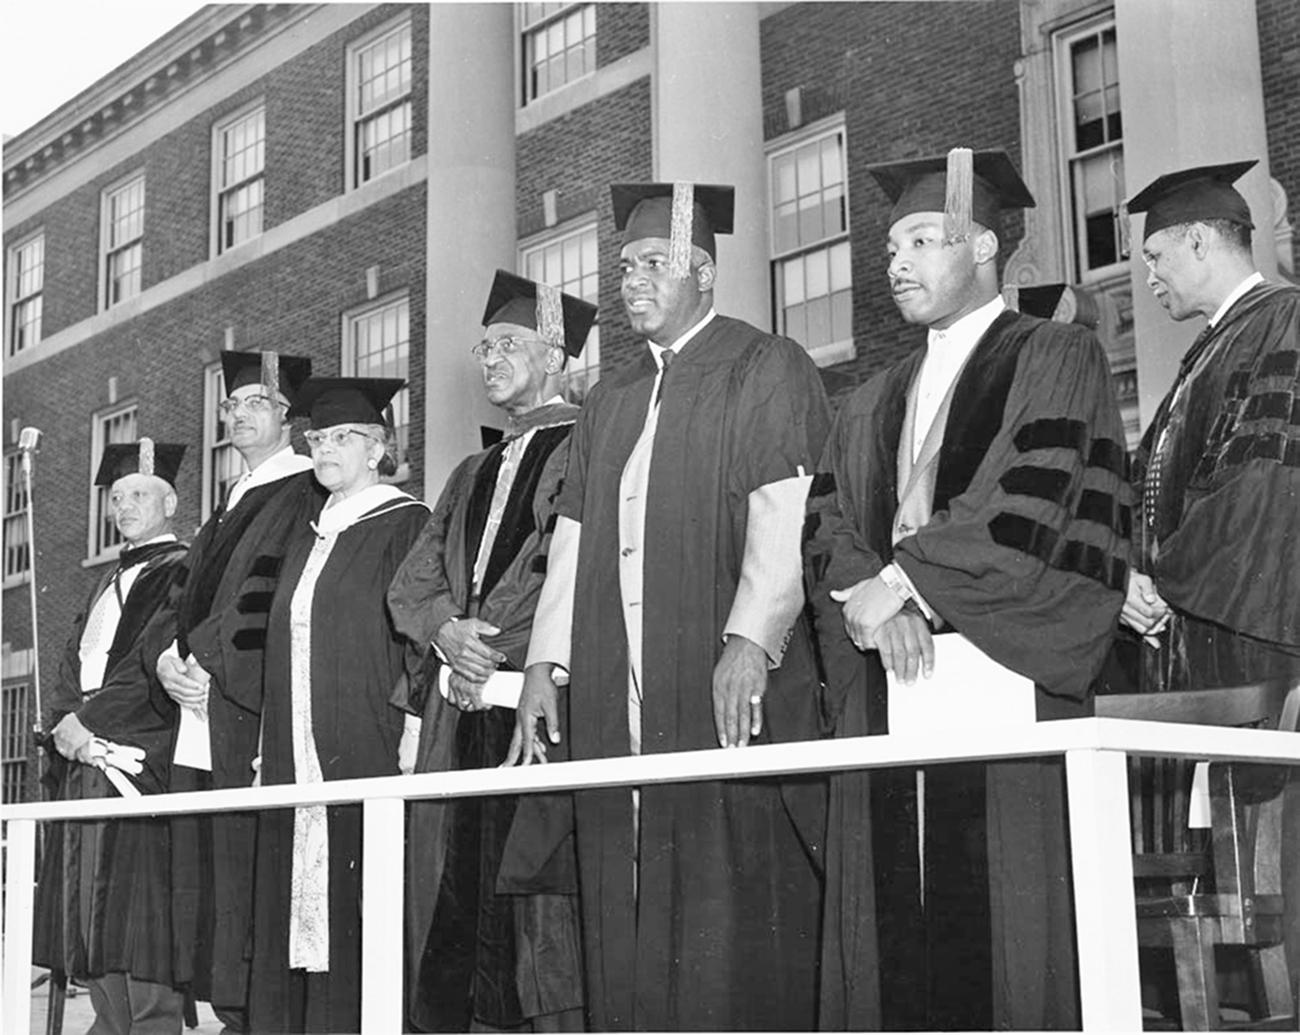 Martin Luther King Jr. and Jackie Robinson standing in graduation robes with other men receiving honorary degrees